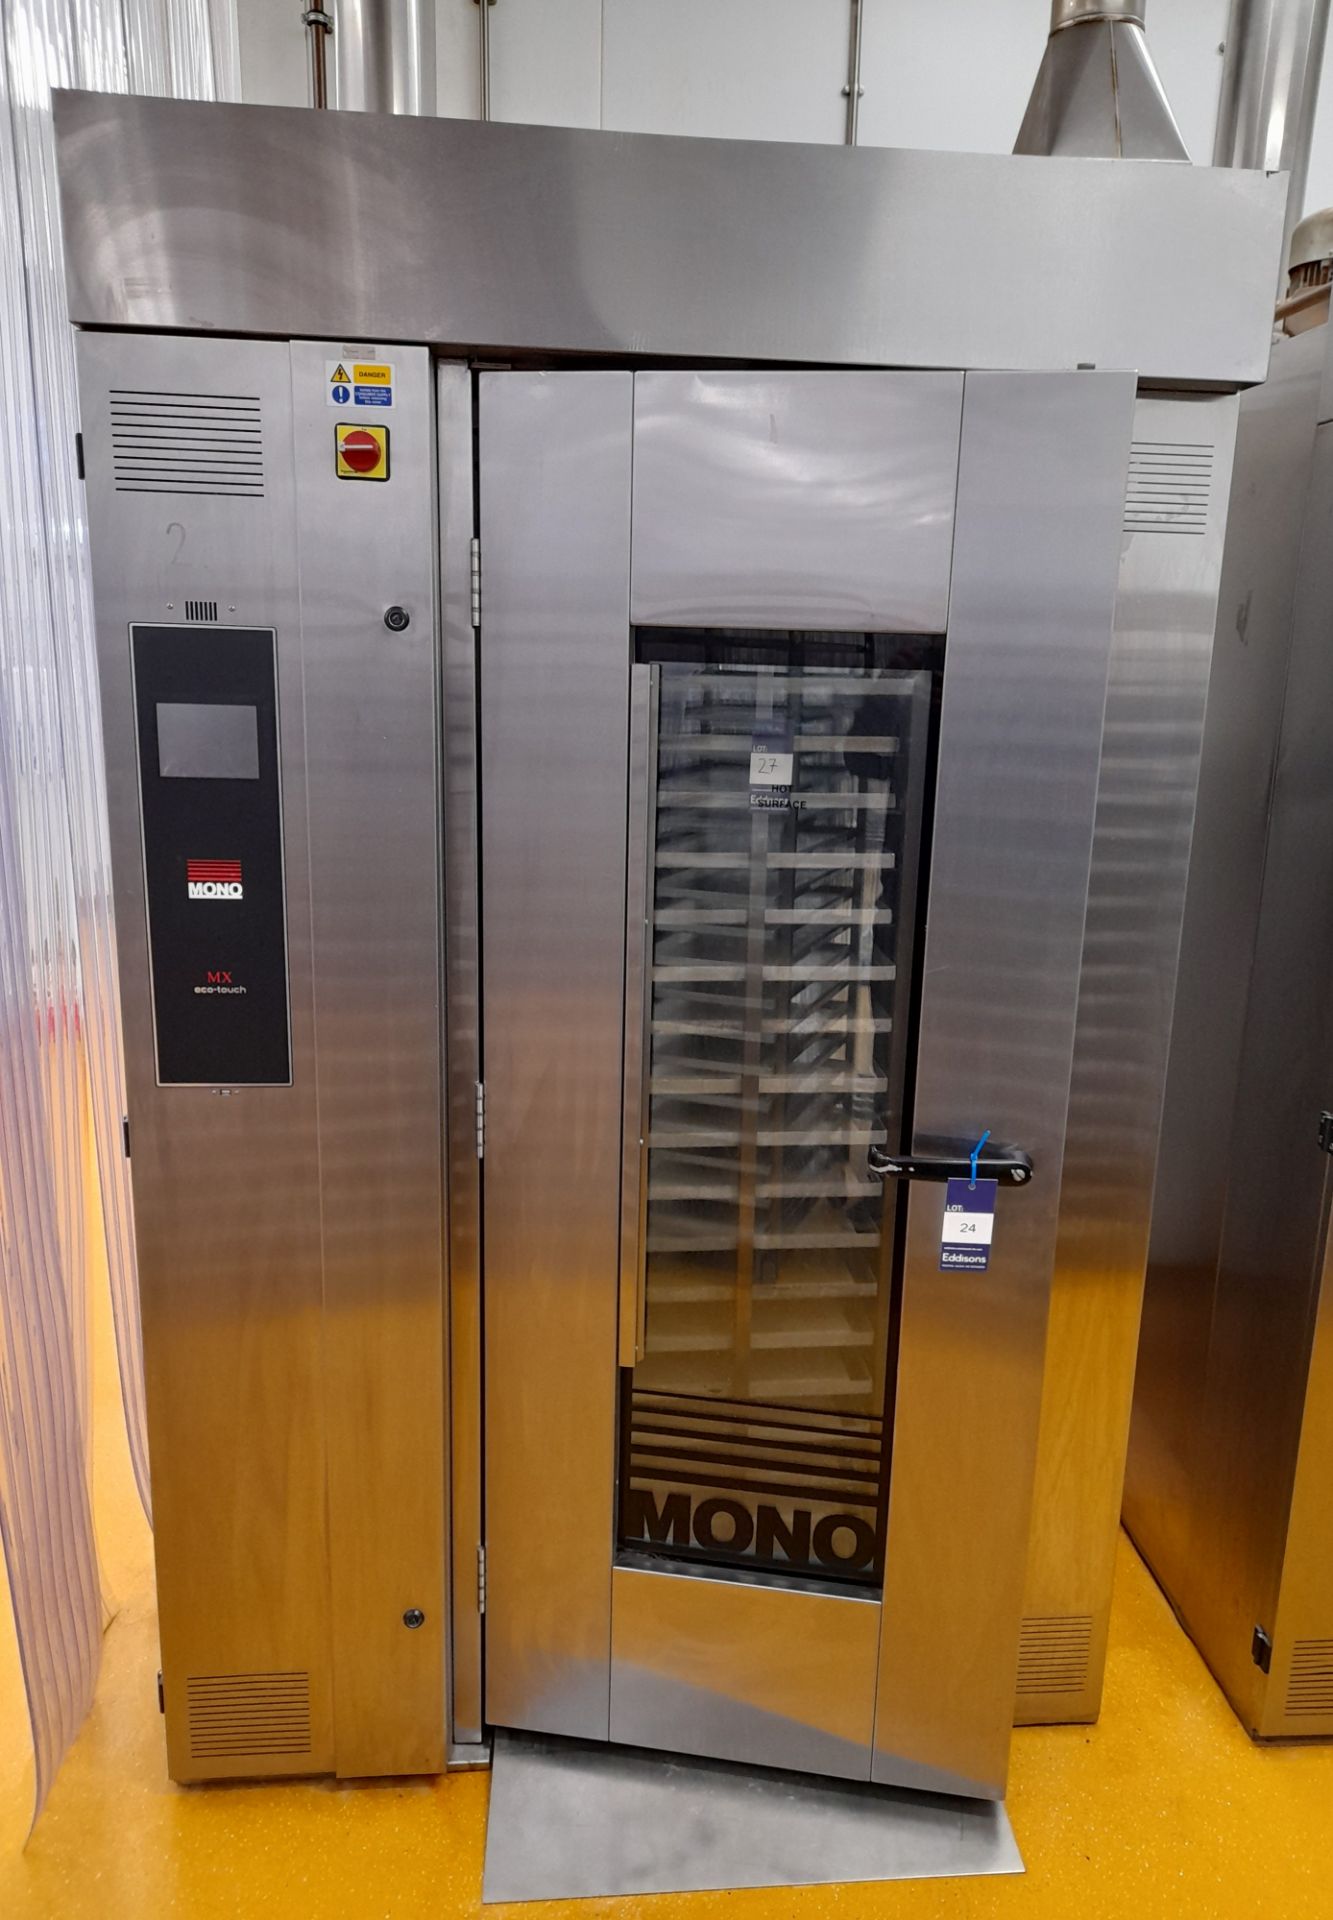 Mono MX Eco-Touch Single Rack Gas Fired Oven – Disconnection by qualified tradesperson required